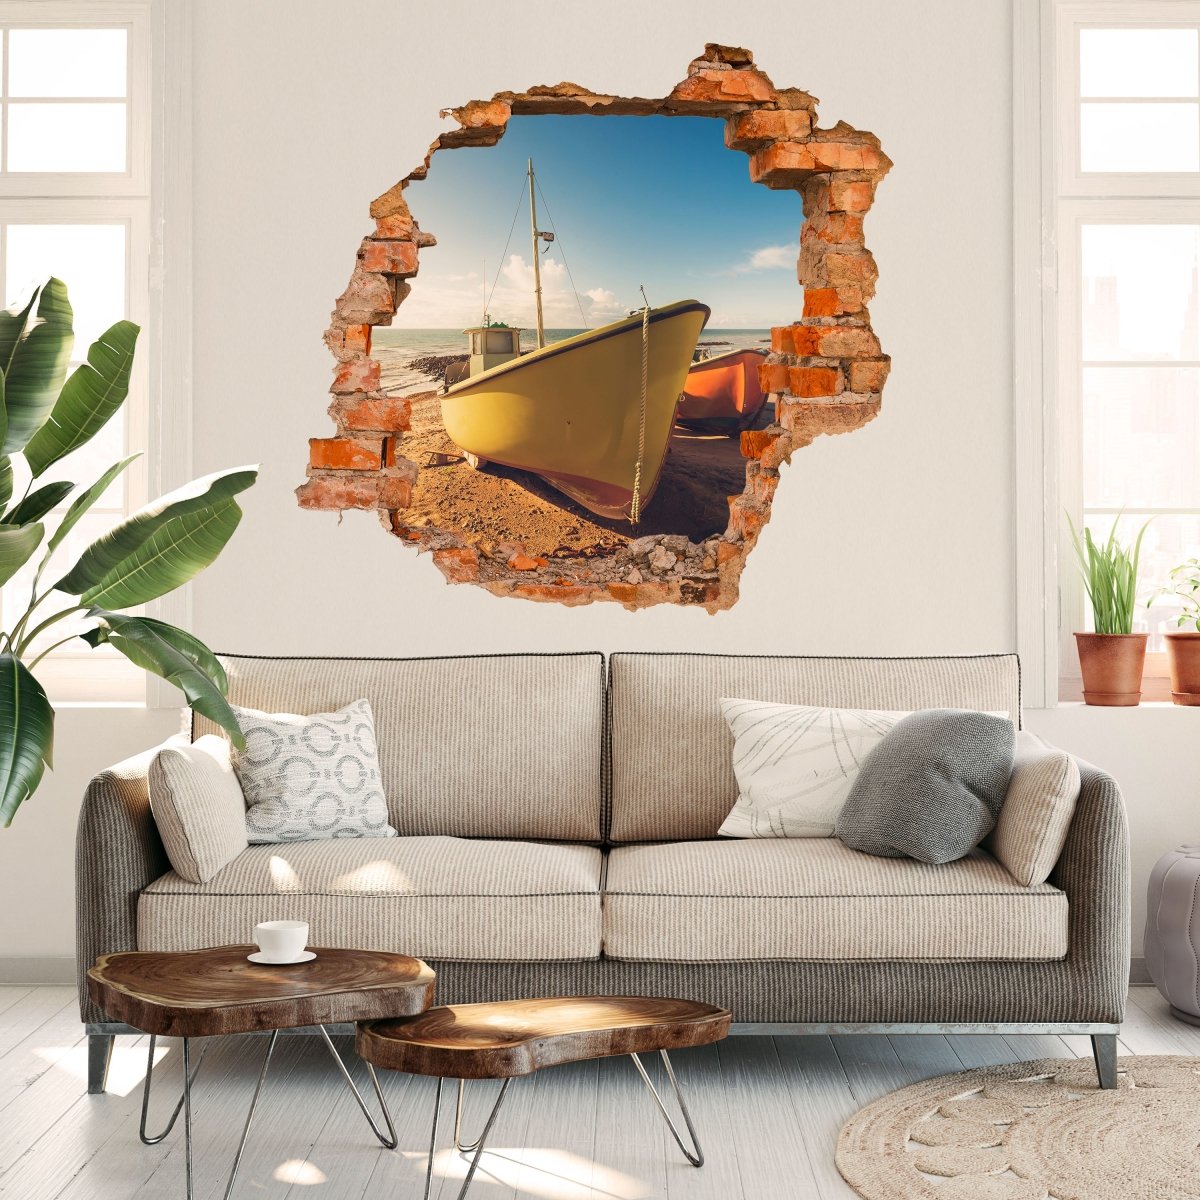 3D Wall Sticker Boats On The Beach - Wall Decal M0388